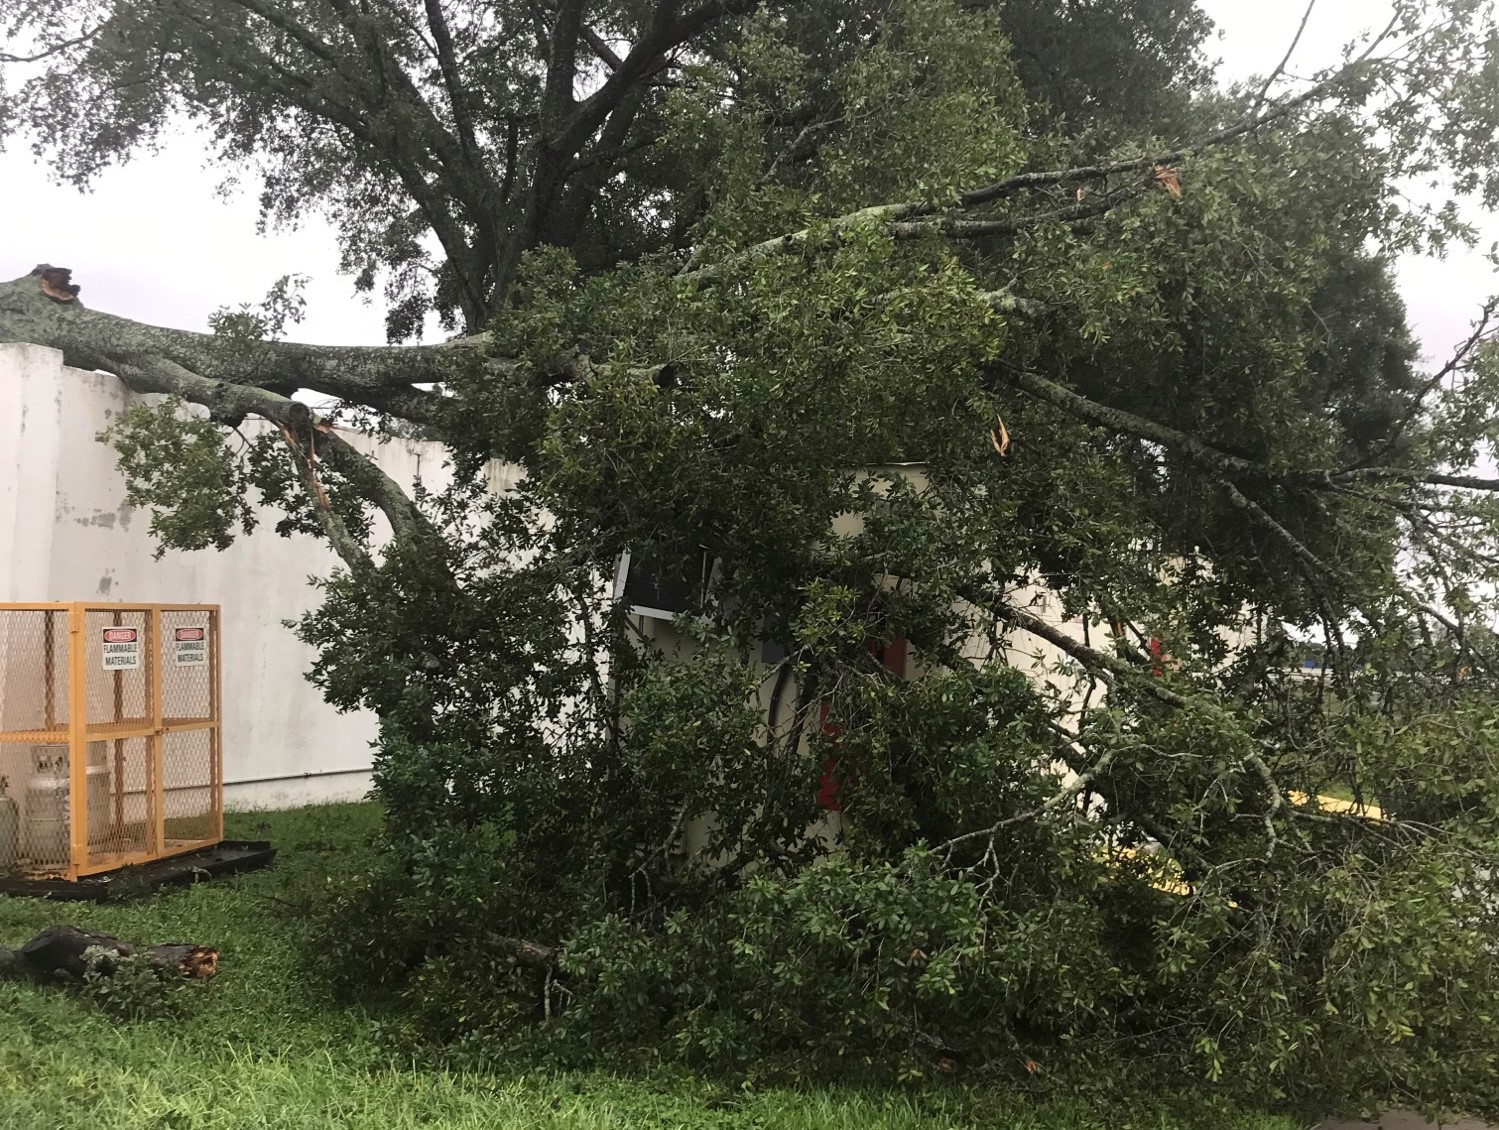 Image of U.S. Chemical Storage Building with fallen tree on top of it due to hurricane